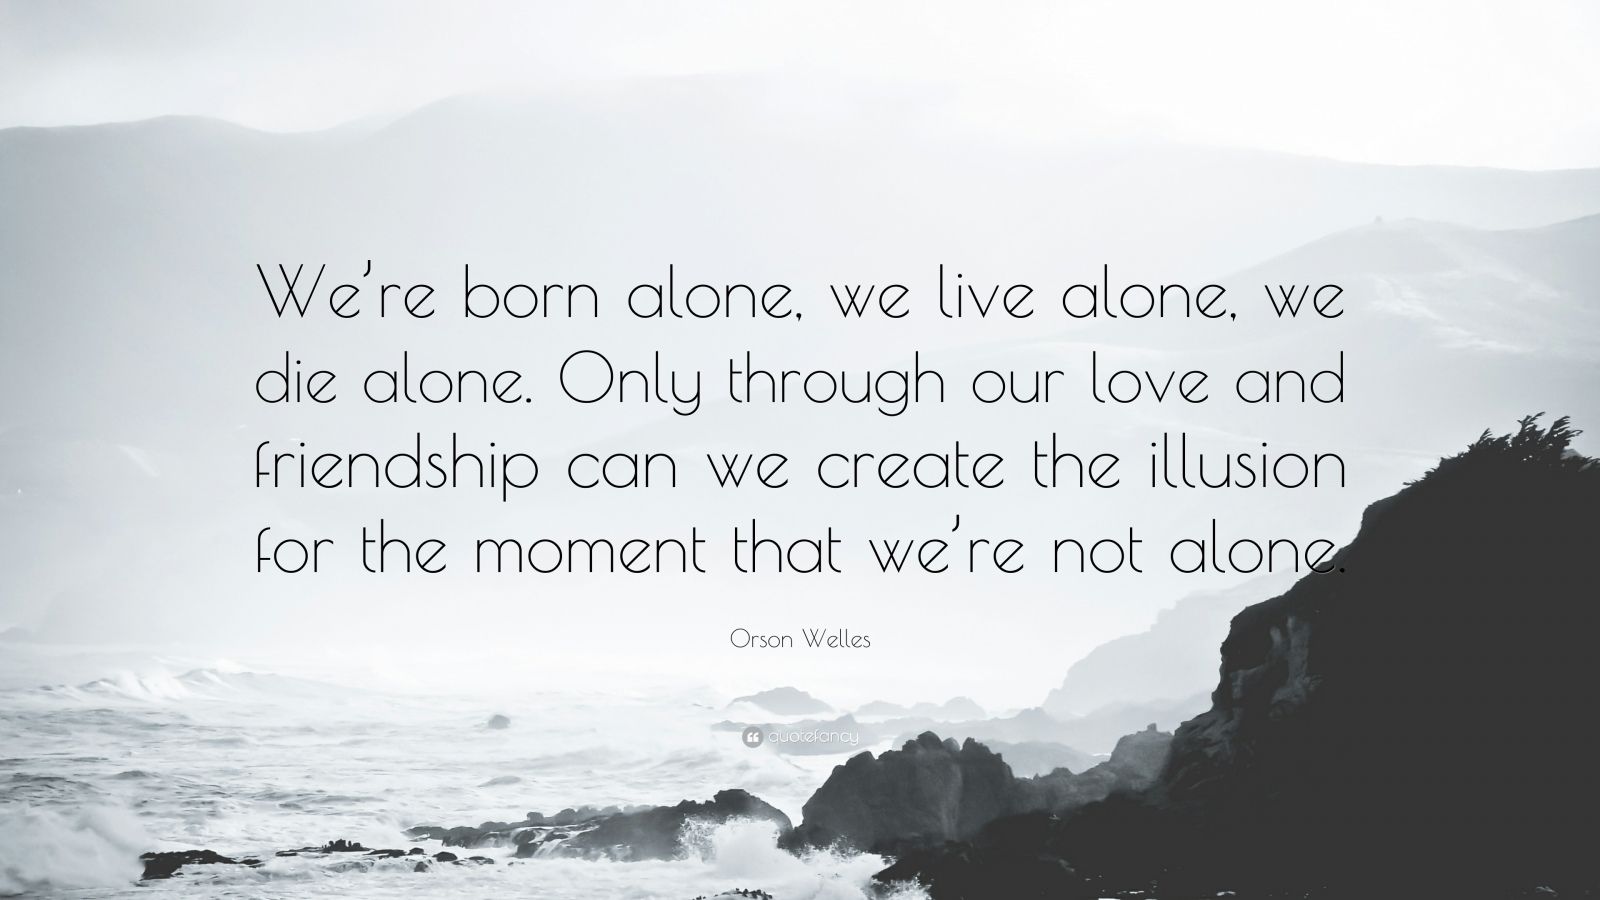 Orson Welles Quote: “We’re born alone, we live alone, we die alone ...